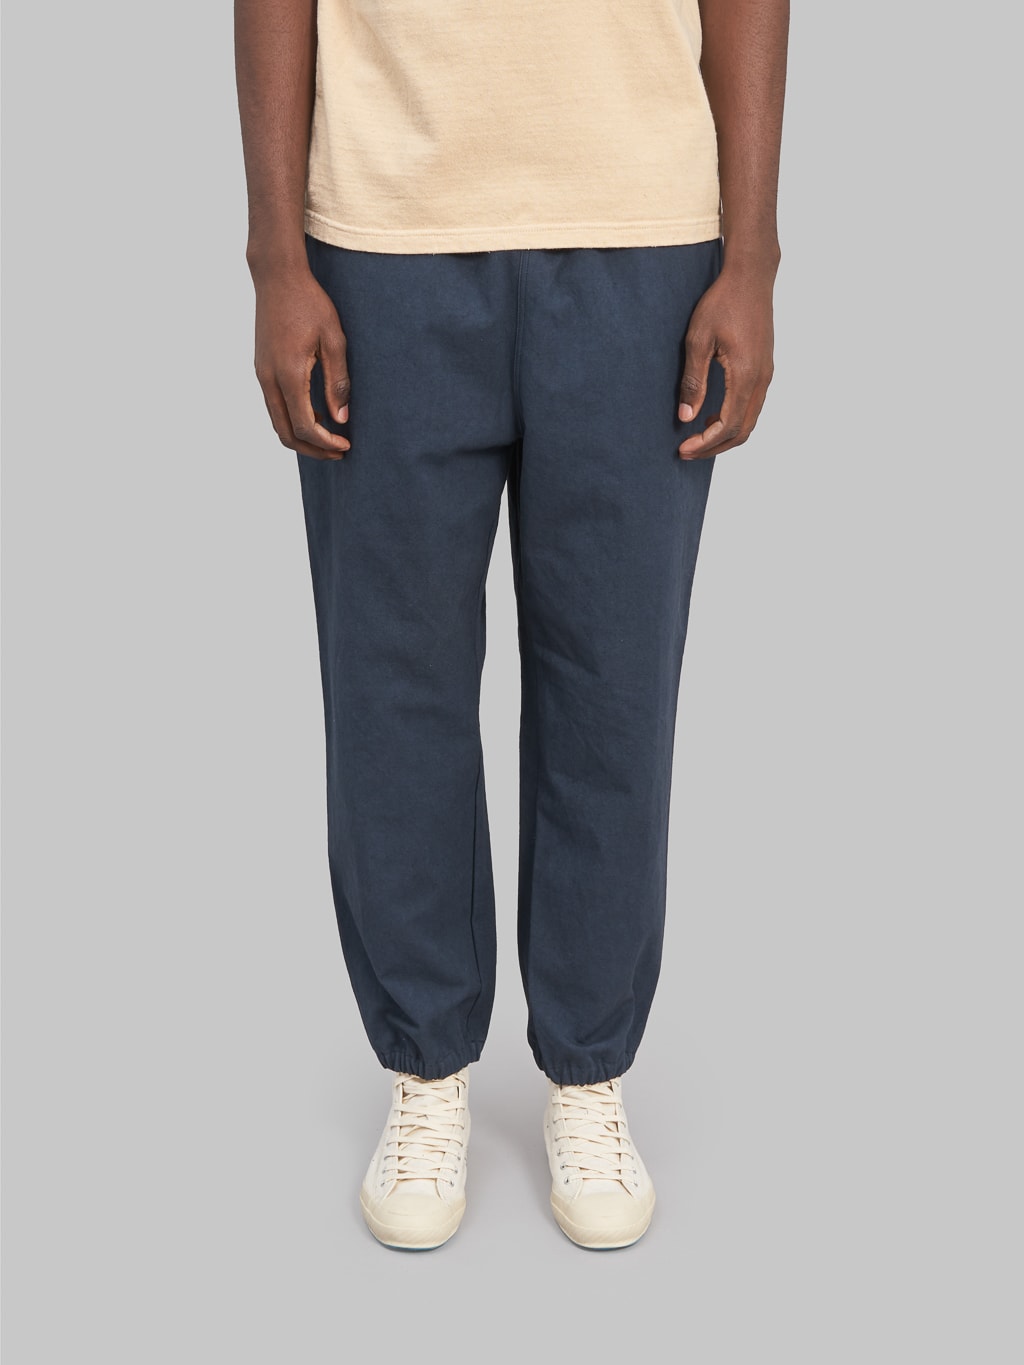 Jackman Canvas Rookie Pants Navy sulfur dyed front